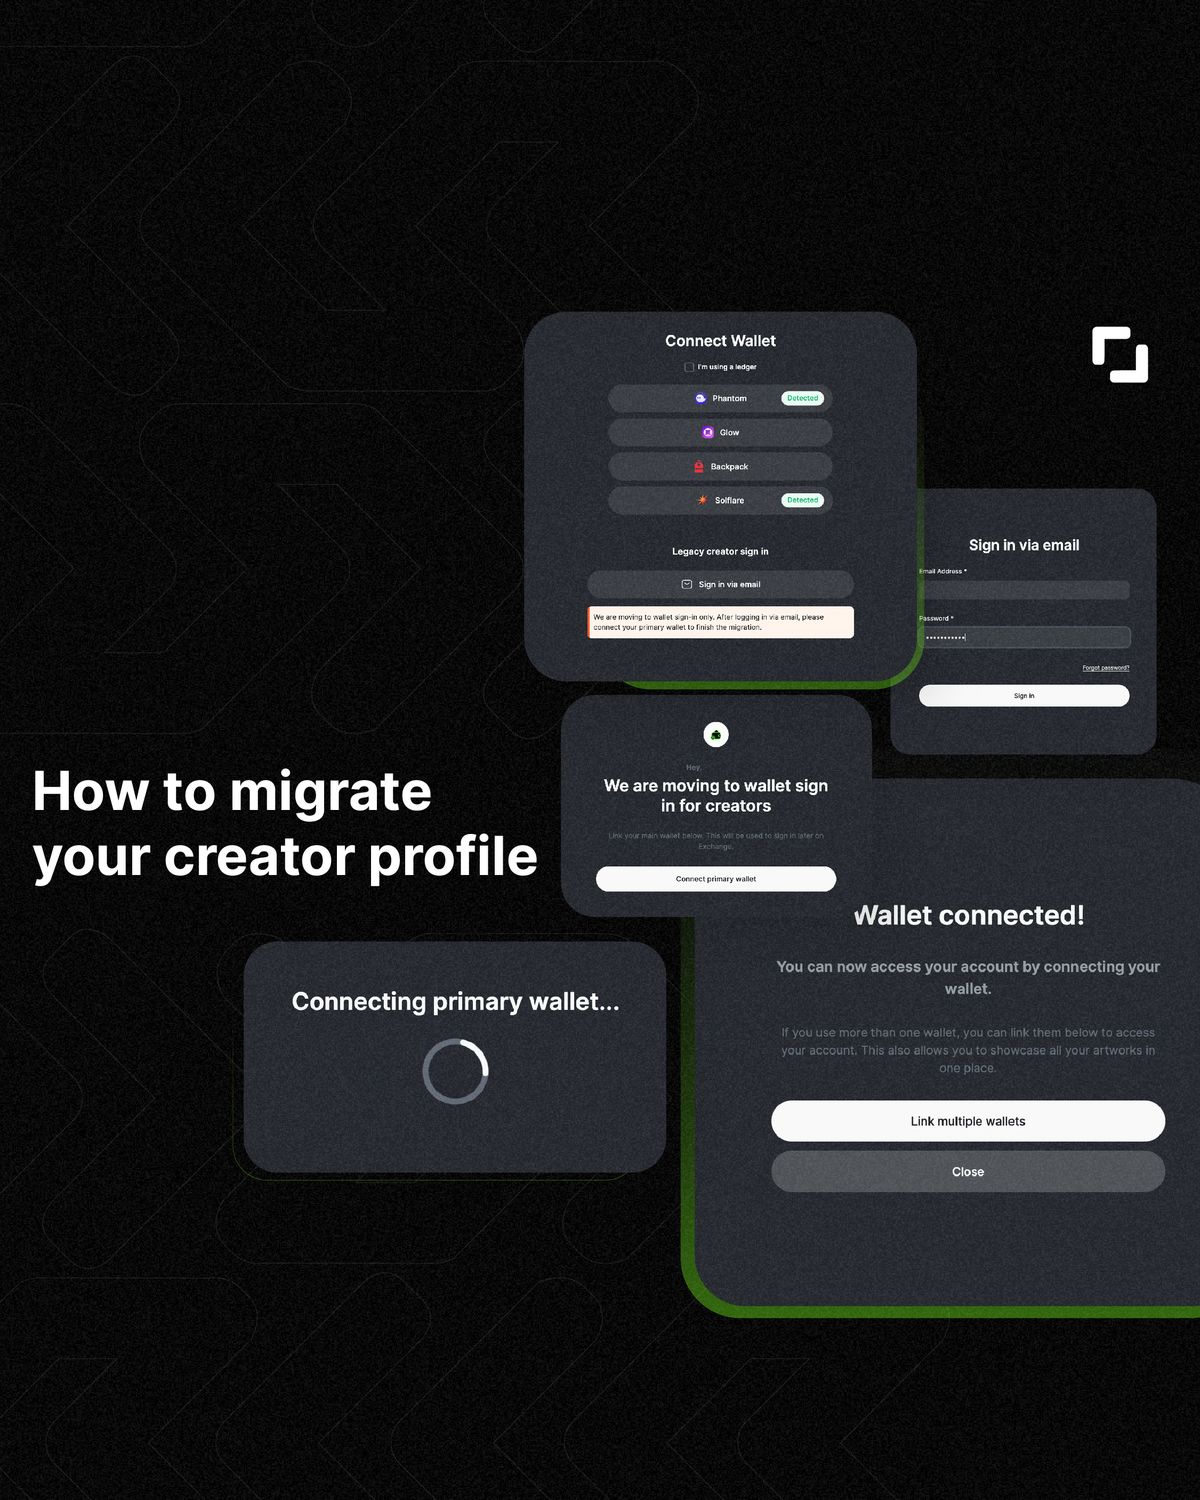 How to migrate your creator profile